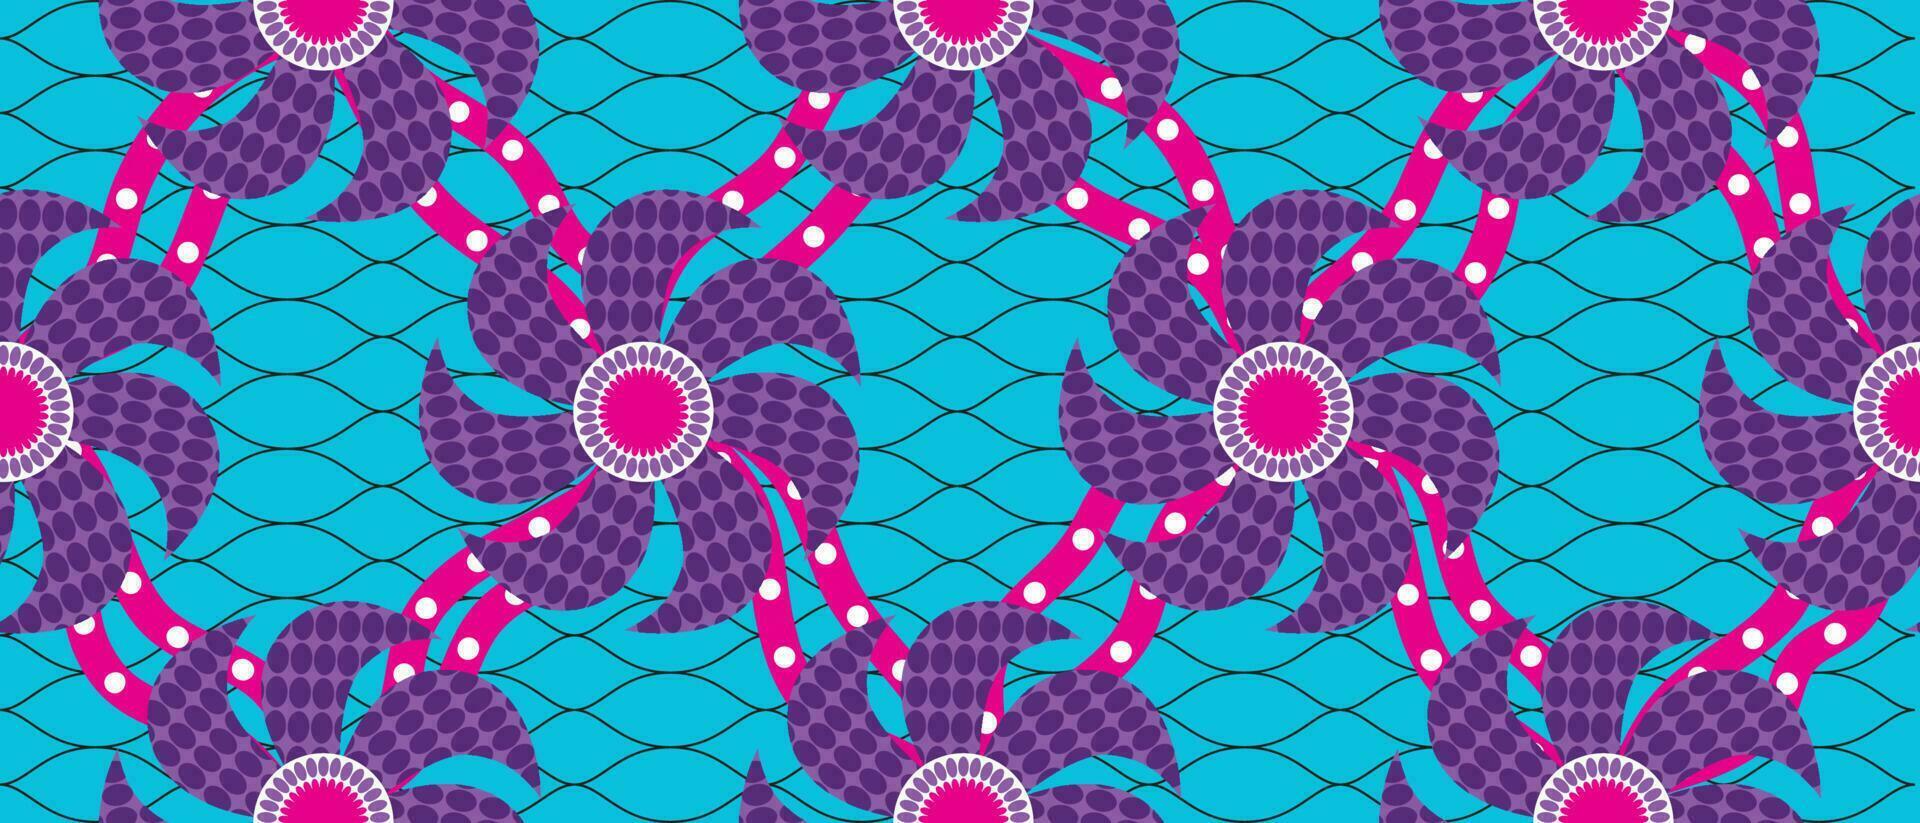 African ethnic traditional blue pattern. seamless beautiful Kitenge, chitenge, Ankara style. fashion design in colorful. purple flower abstract motif. Floral  Ankara prints, African wax prints. vector